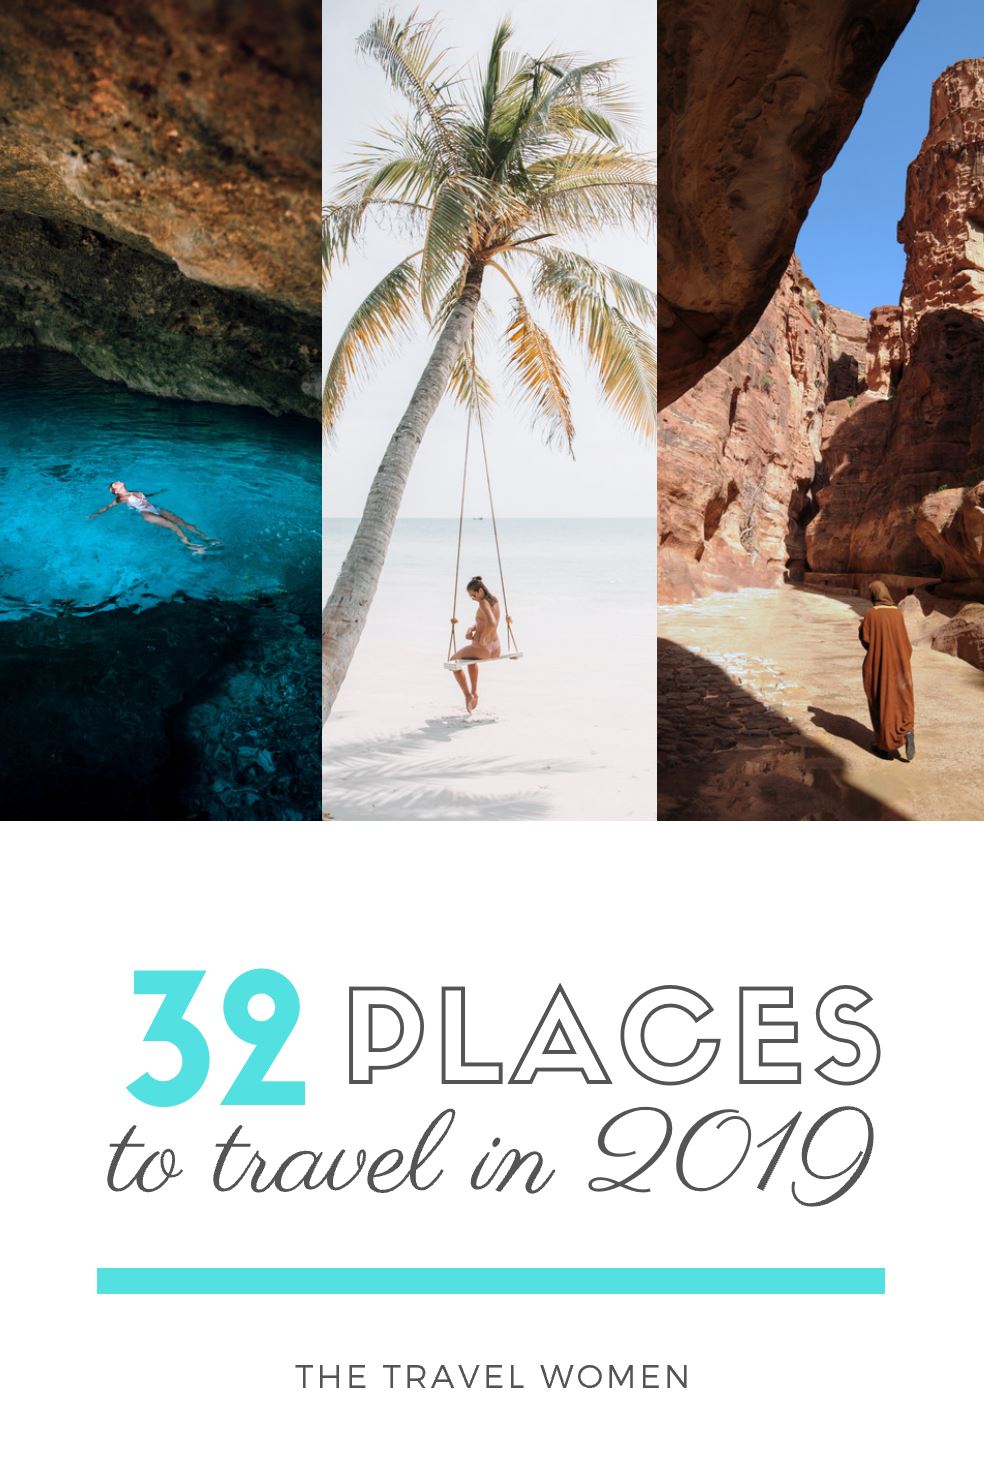 32 Places to Travel in 2019